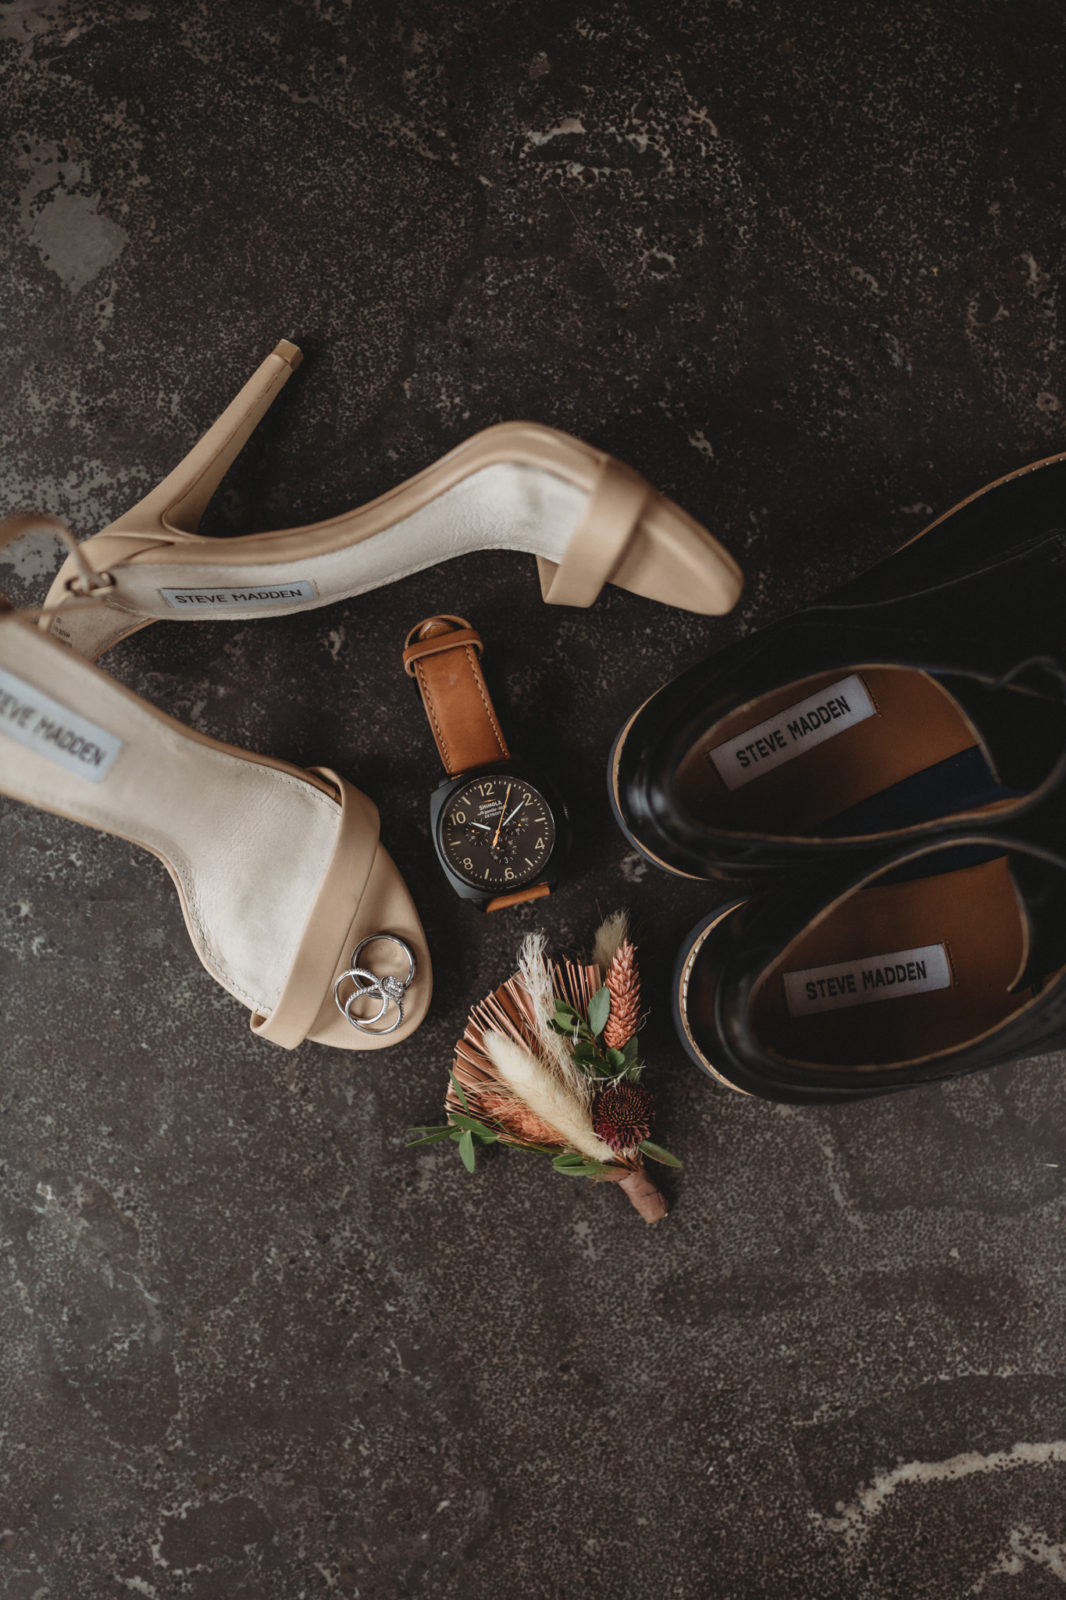 Styled flatlay against a charcoal background featuring gold heel and grooms shoes by Steve Madden